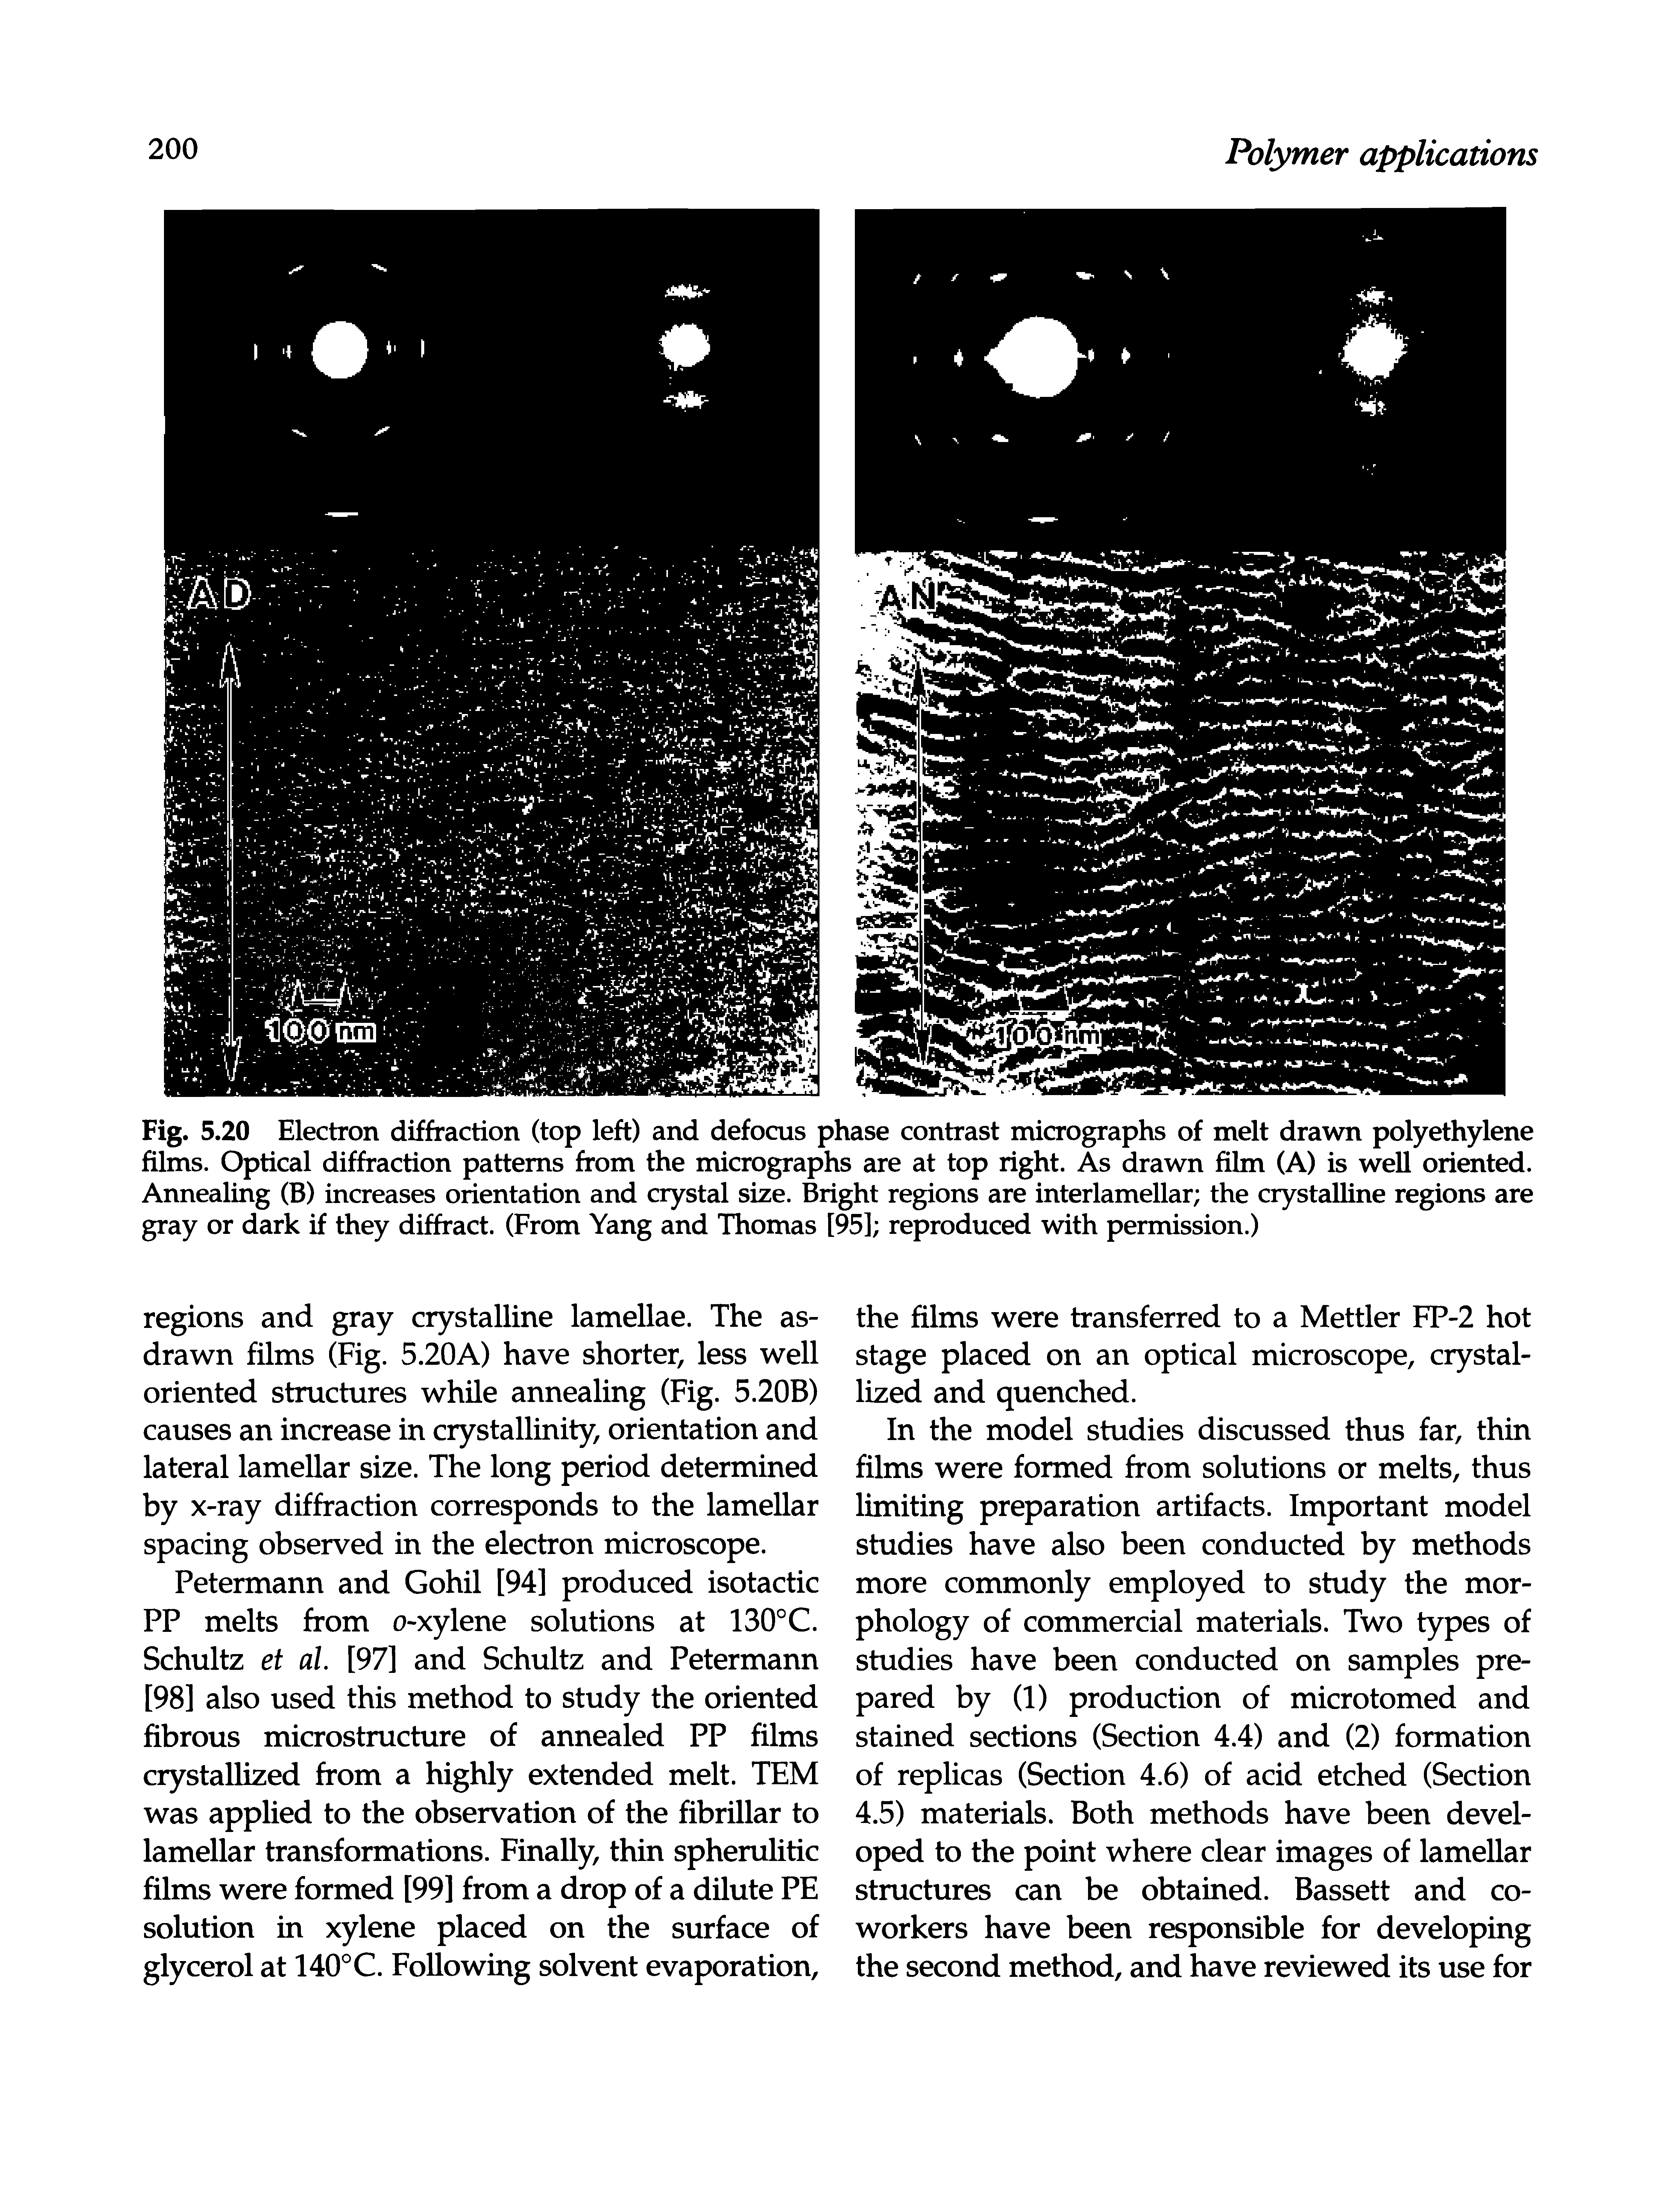 Fig. 5.20 Electron diffraction (top left) and defocus phase contrast micrographs of melt drawn polyethylene films. Optical diffraction patterns from the micrographs are at top right. As drawn film (A) is well oriented. Annealing (B) increases orientation and crystal size. Bright regions are interlamellar the crystalline regions are gray or dark if they diffract. (From Yang and Thomas [95] reproduced with permission.)...